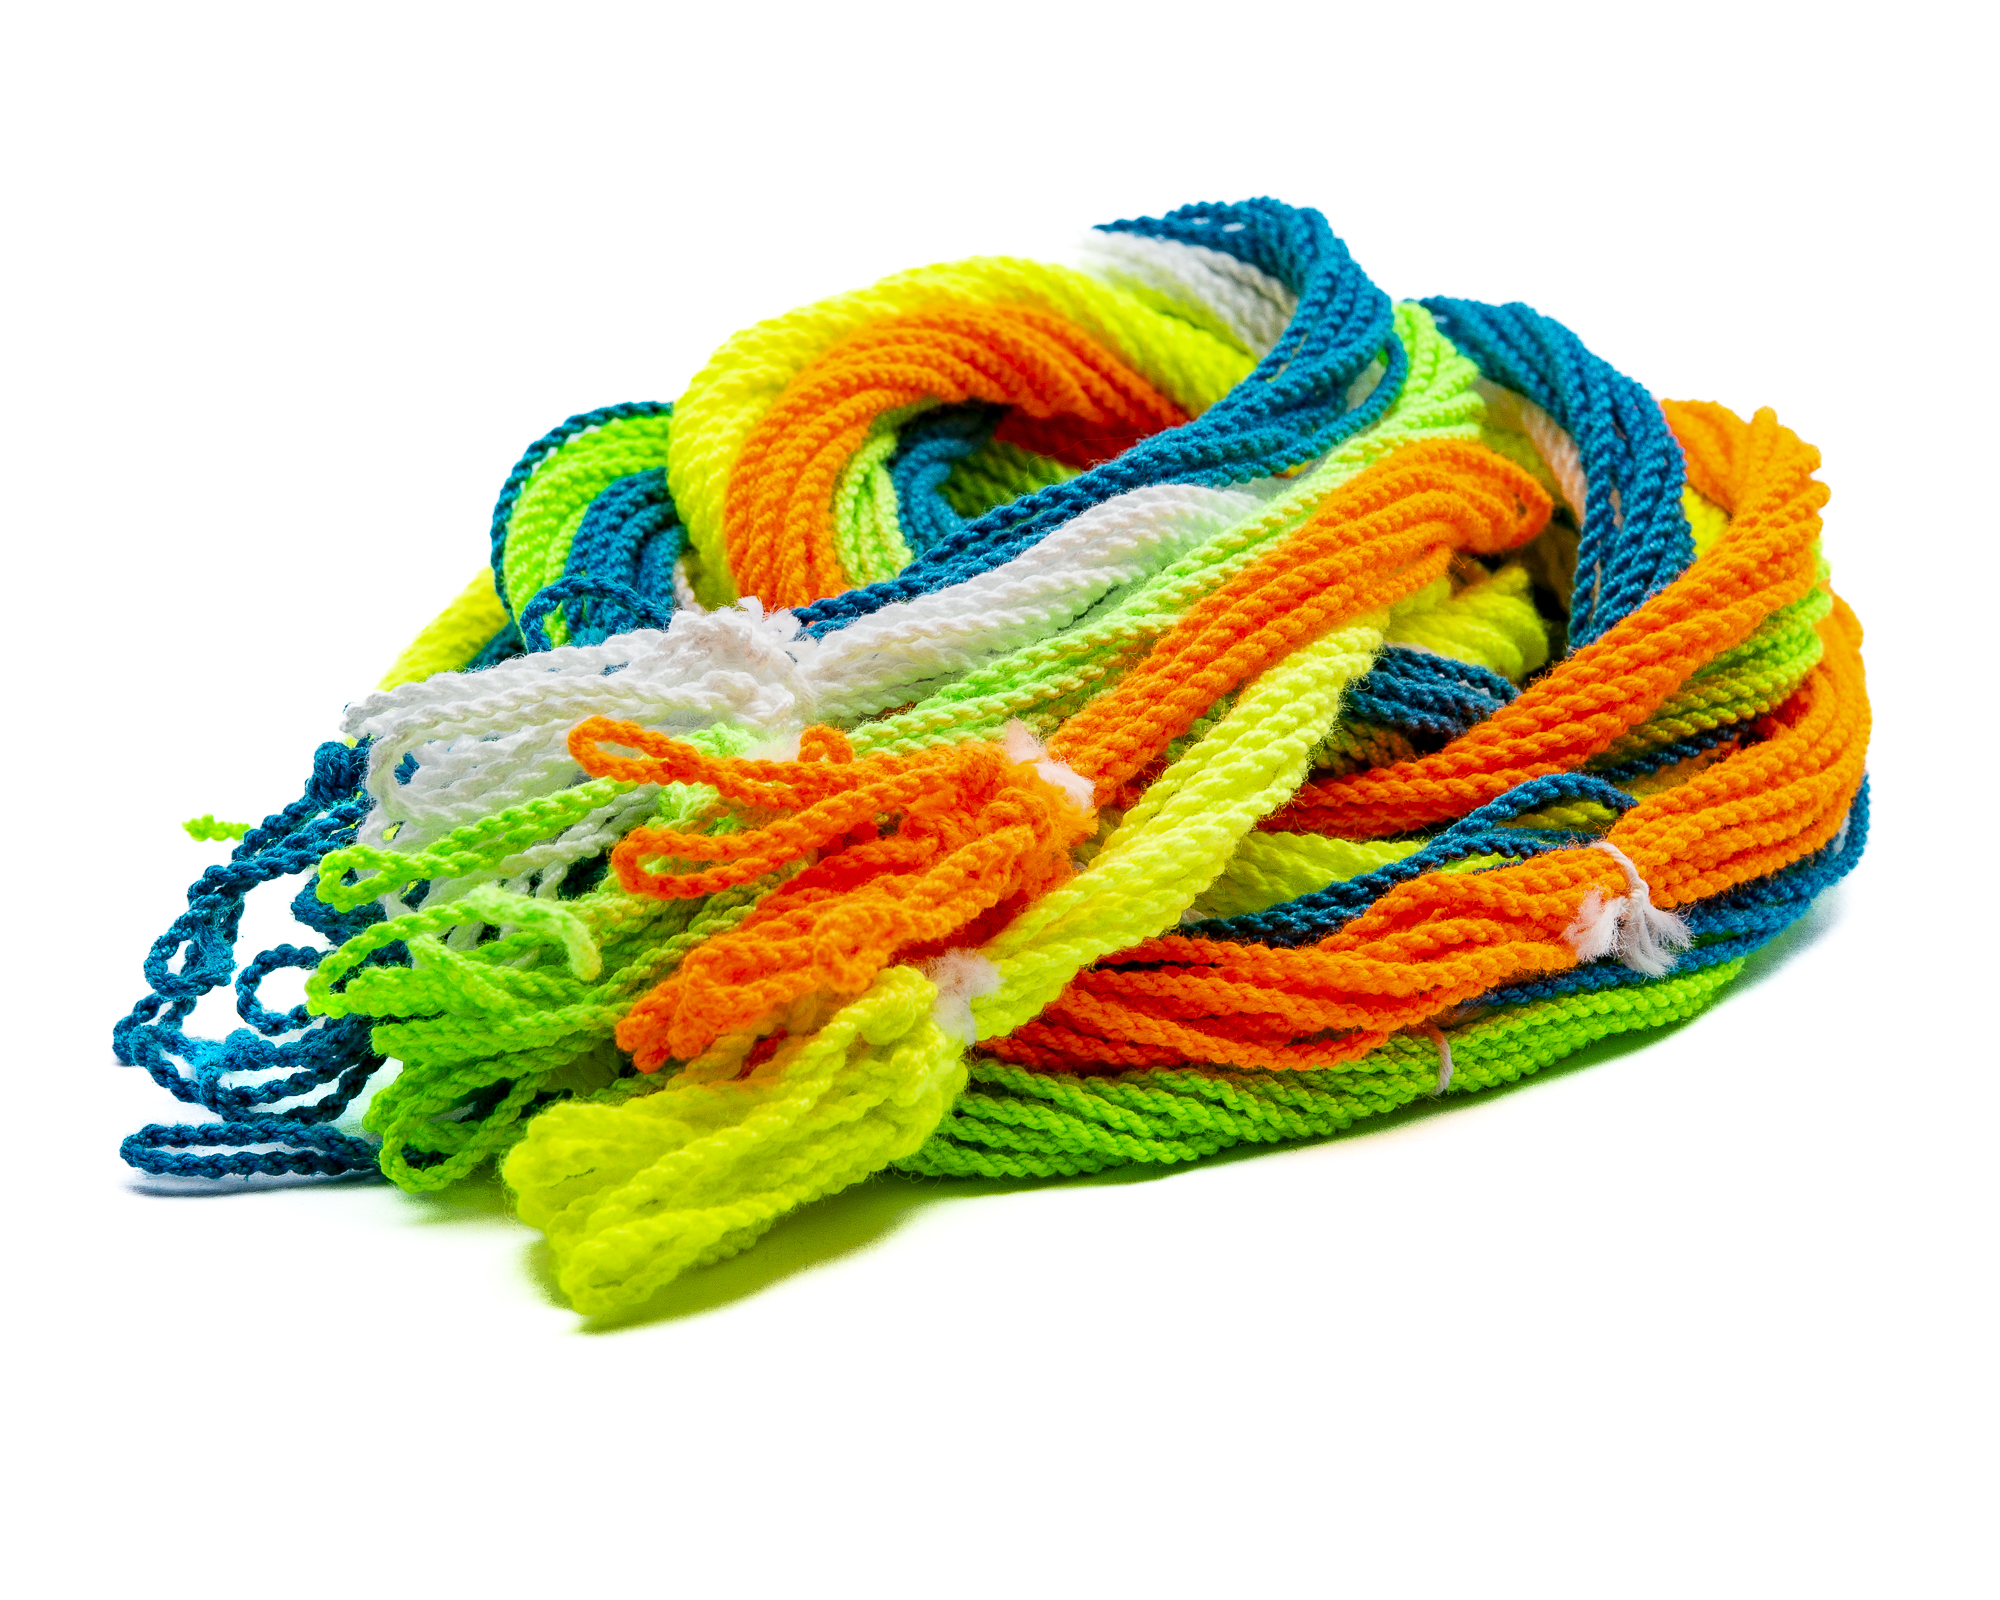 50 Multicolor-Strings (100% Polyester)